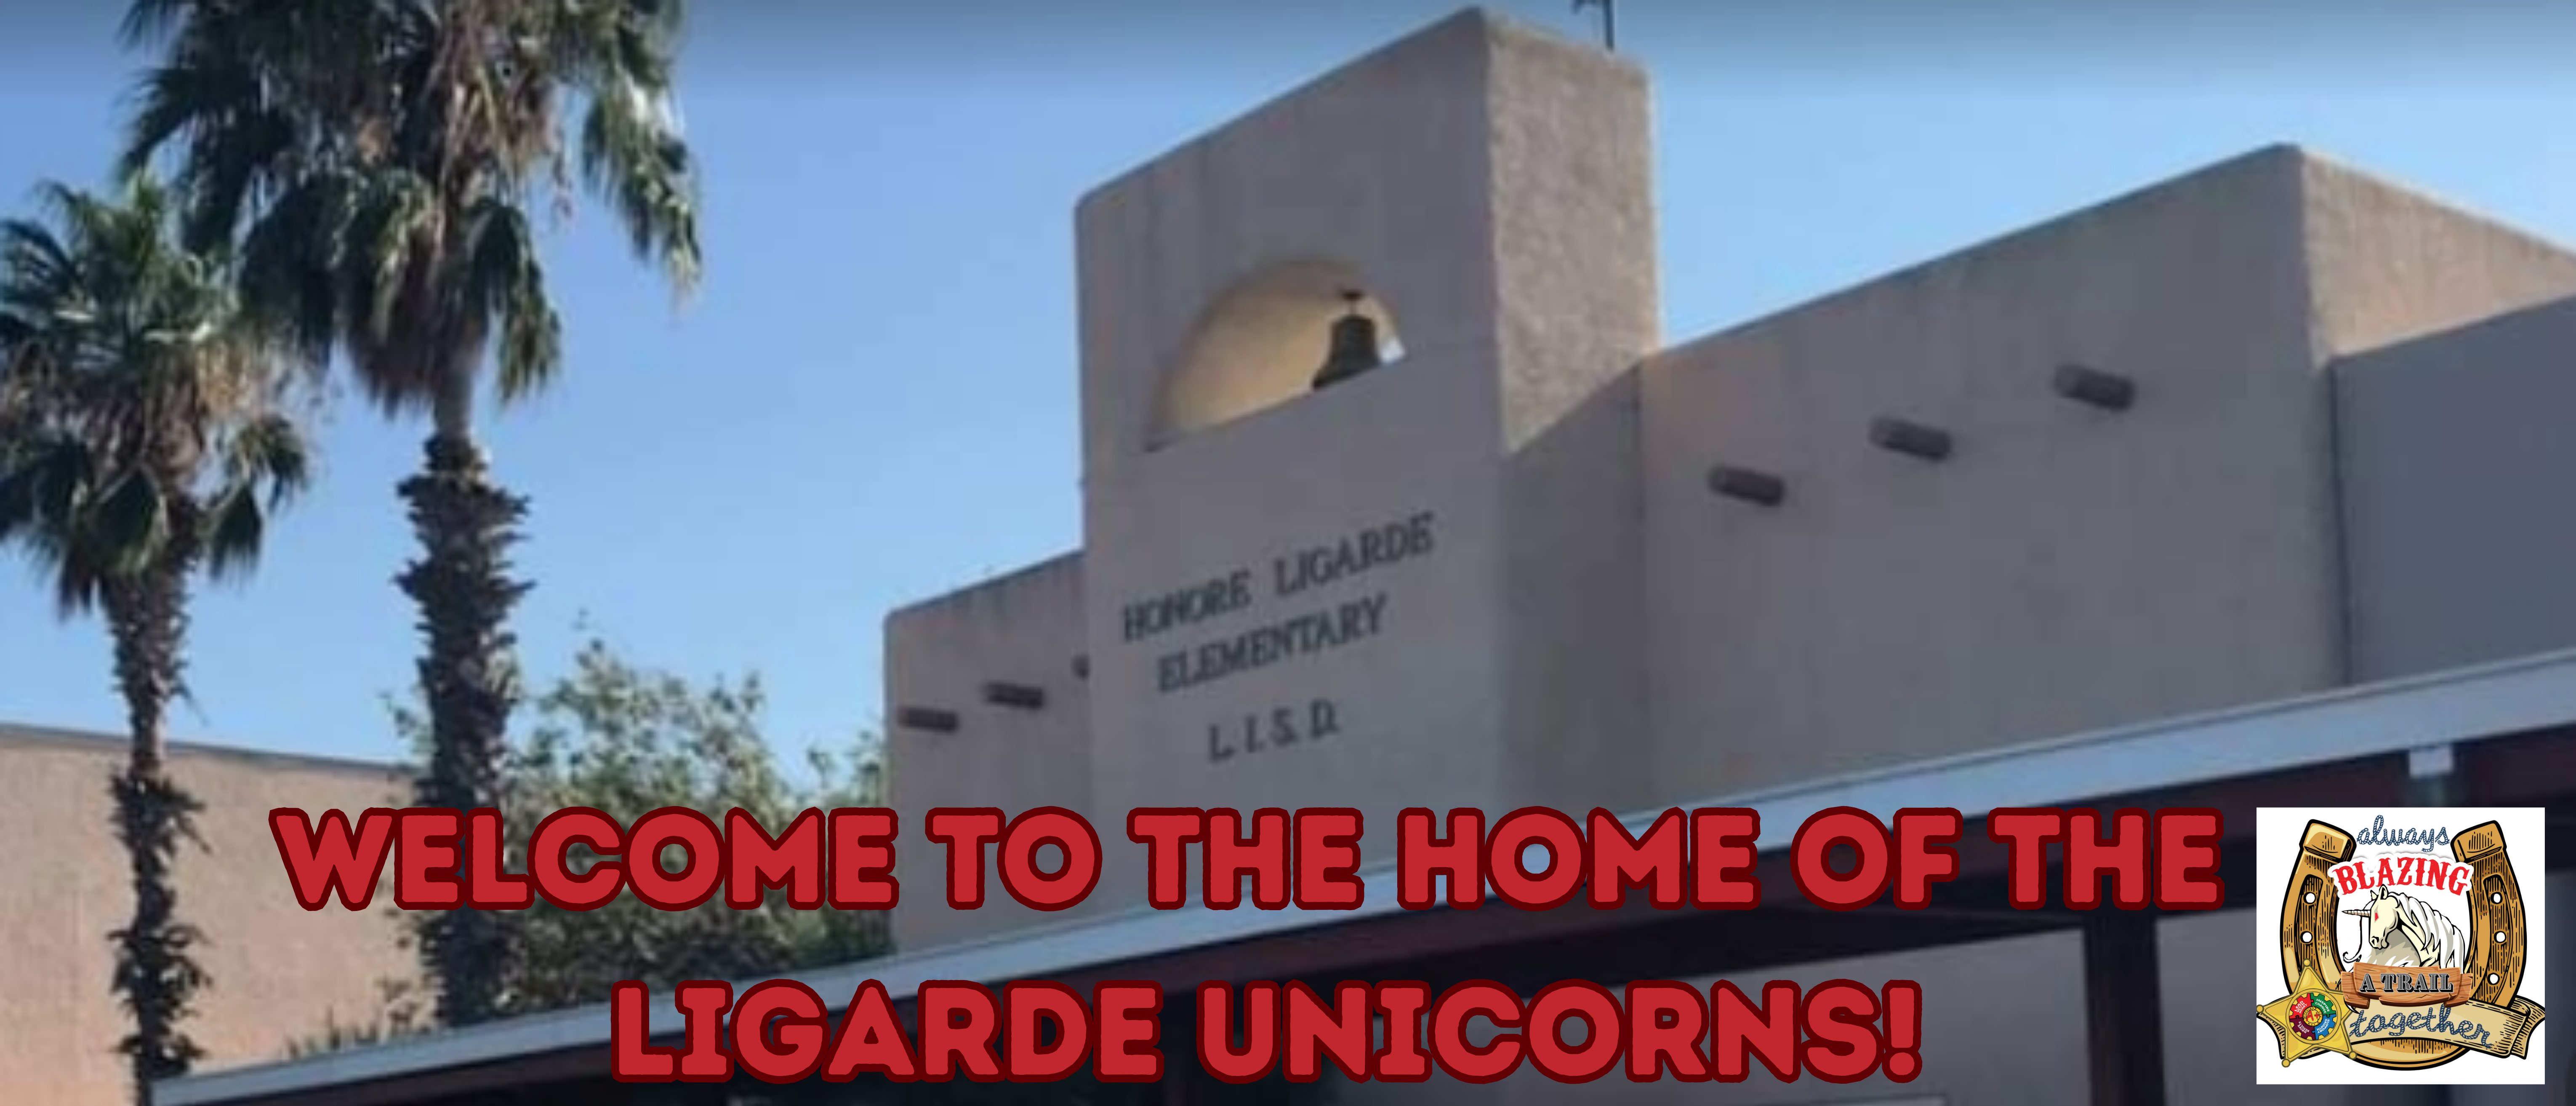 Welcome to Ligarde